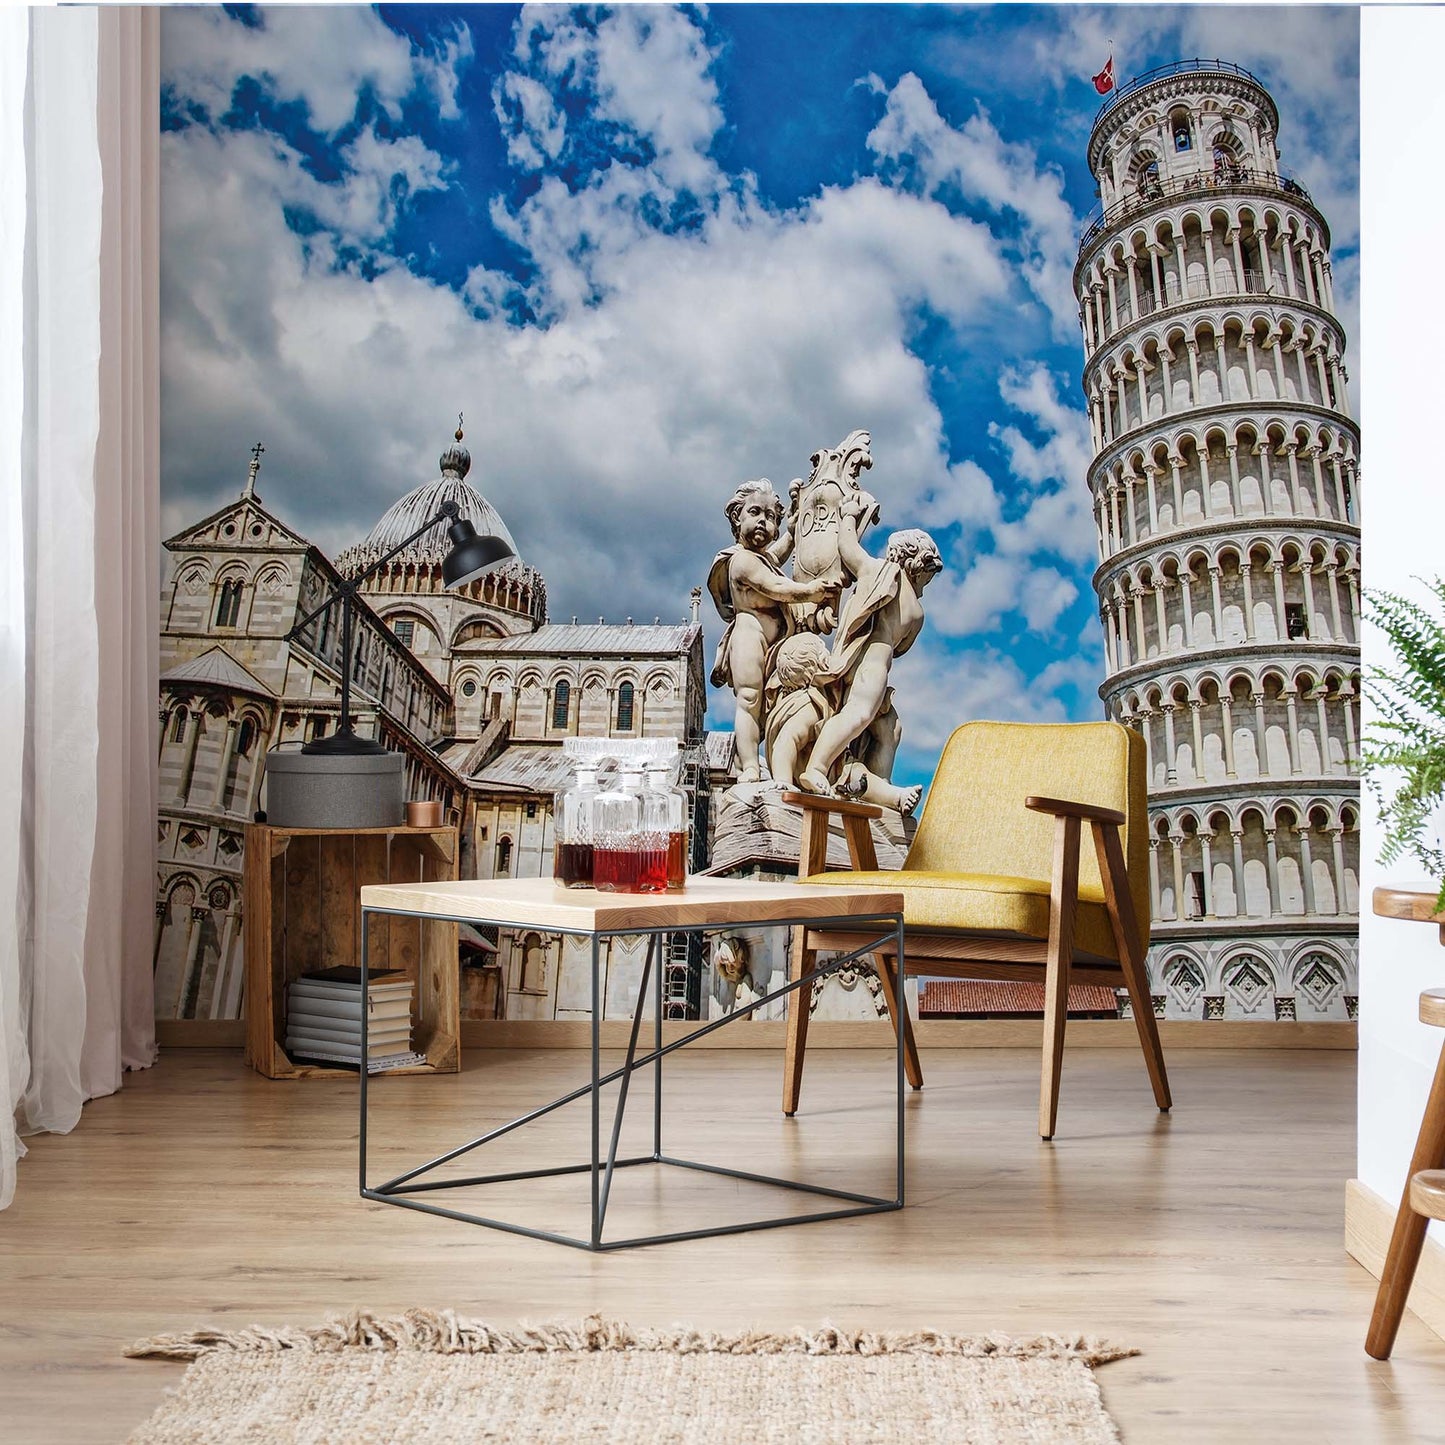 Leaning Tower Of Pisa Italy Photo Wallpaper Wall Mural - USTAD HOME